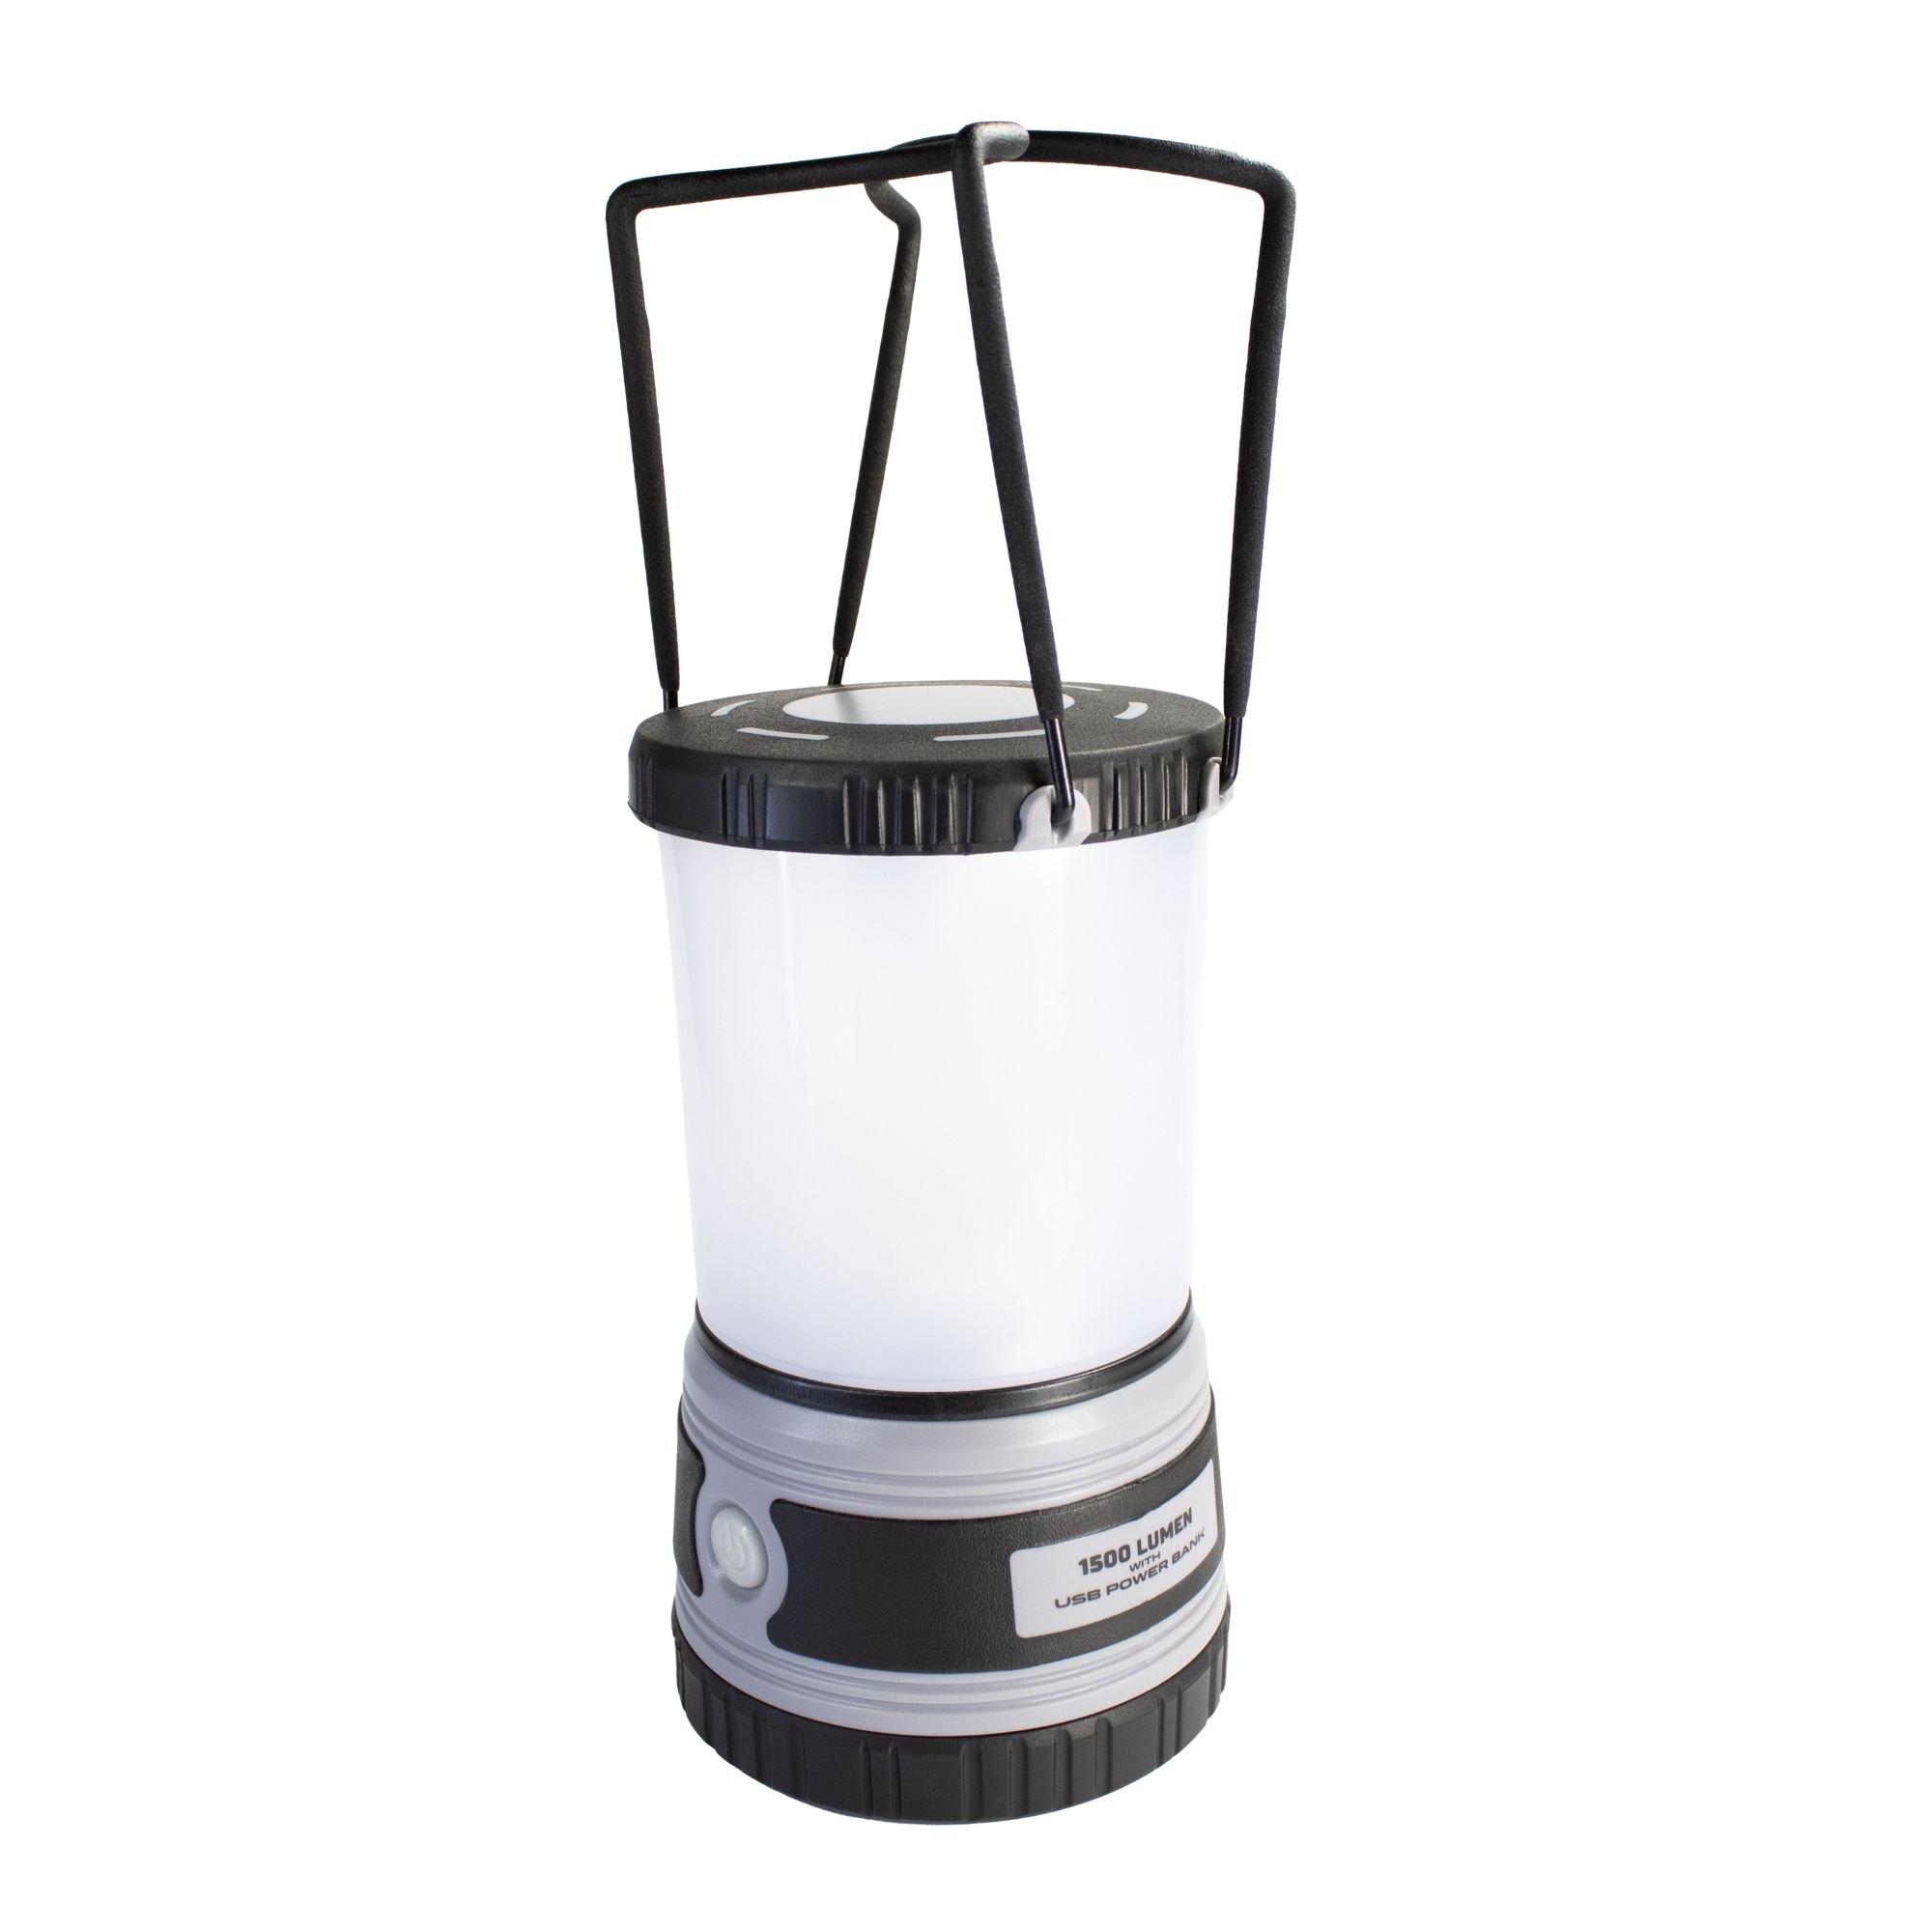 Police Security 1500 Lumen Ultra Bright LED Lantern with USB Charging Station, 4.5L x 4.5W x 8H